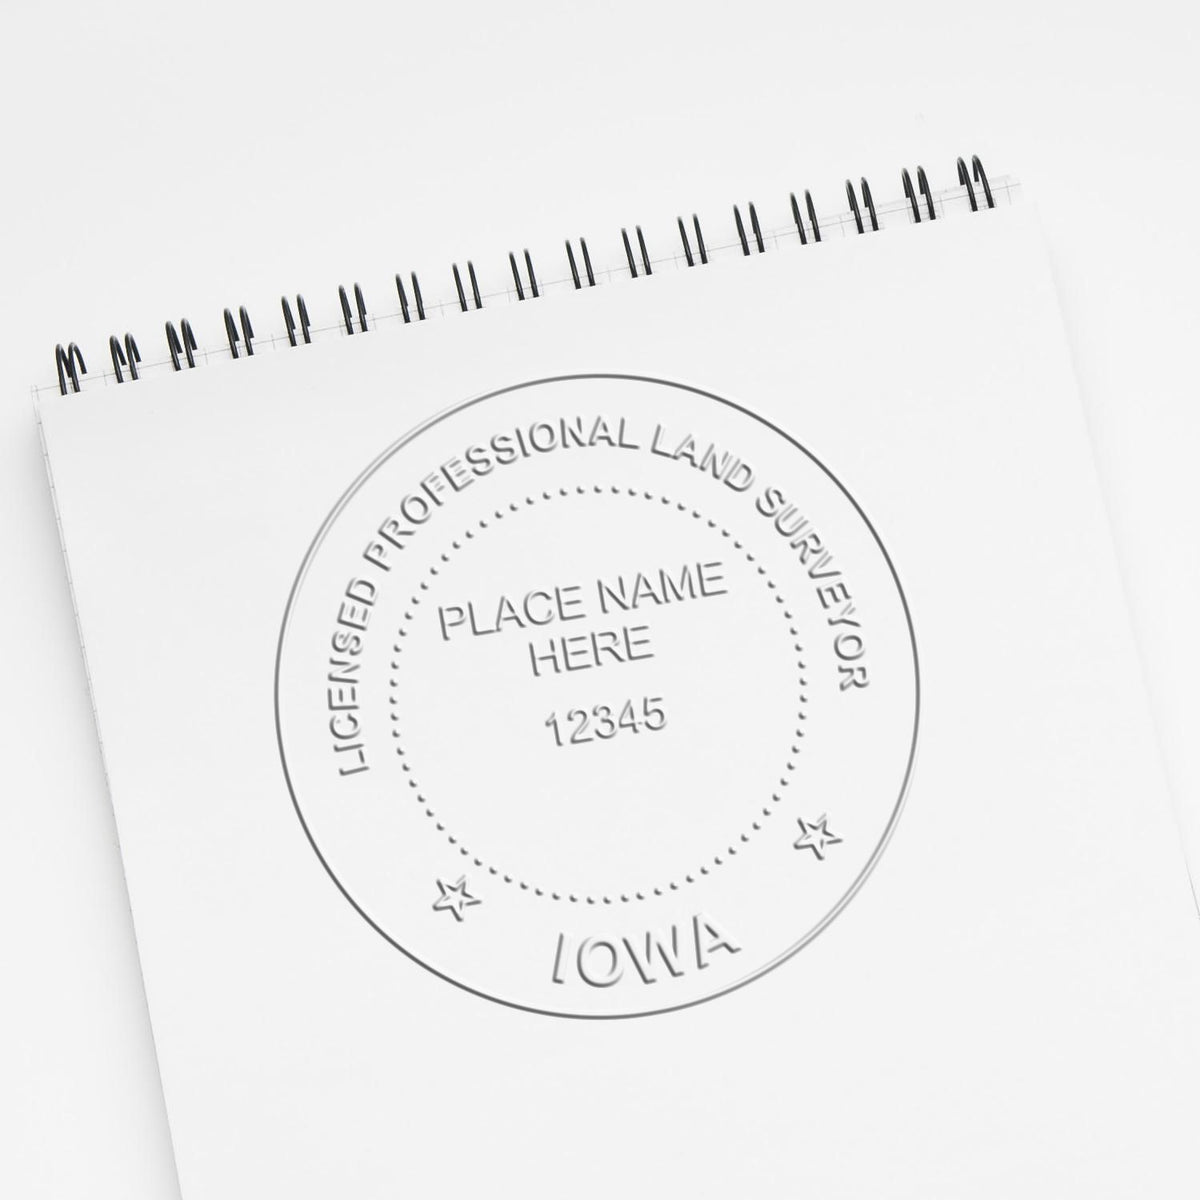 A photograph of the Heavy Duty Cast Iron Iowa Land Surveyor Seal Embosser stamp impression reveals a vivid, professional image of the on paper.